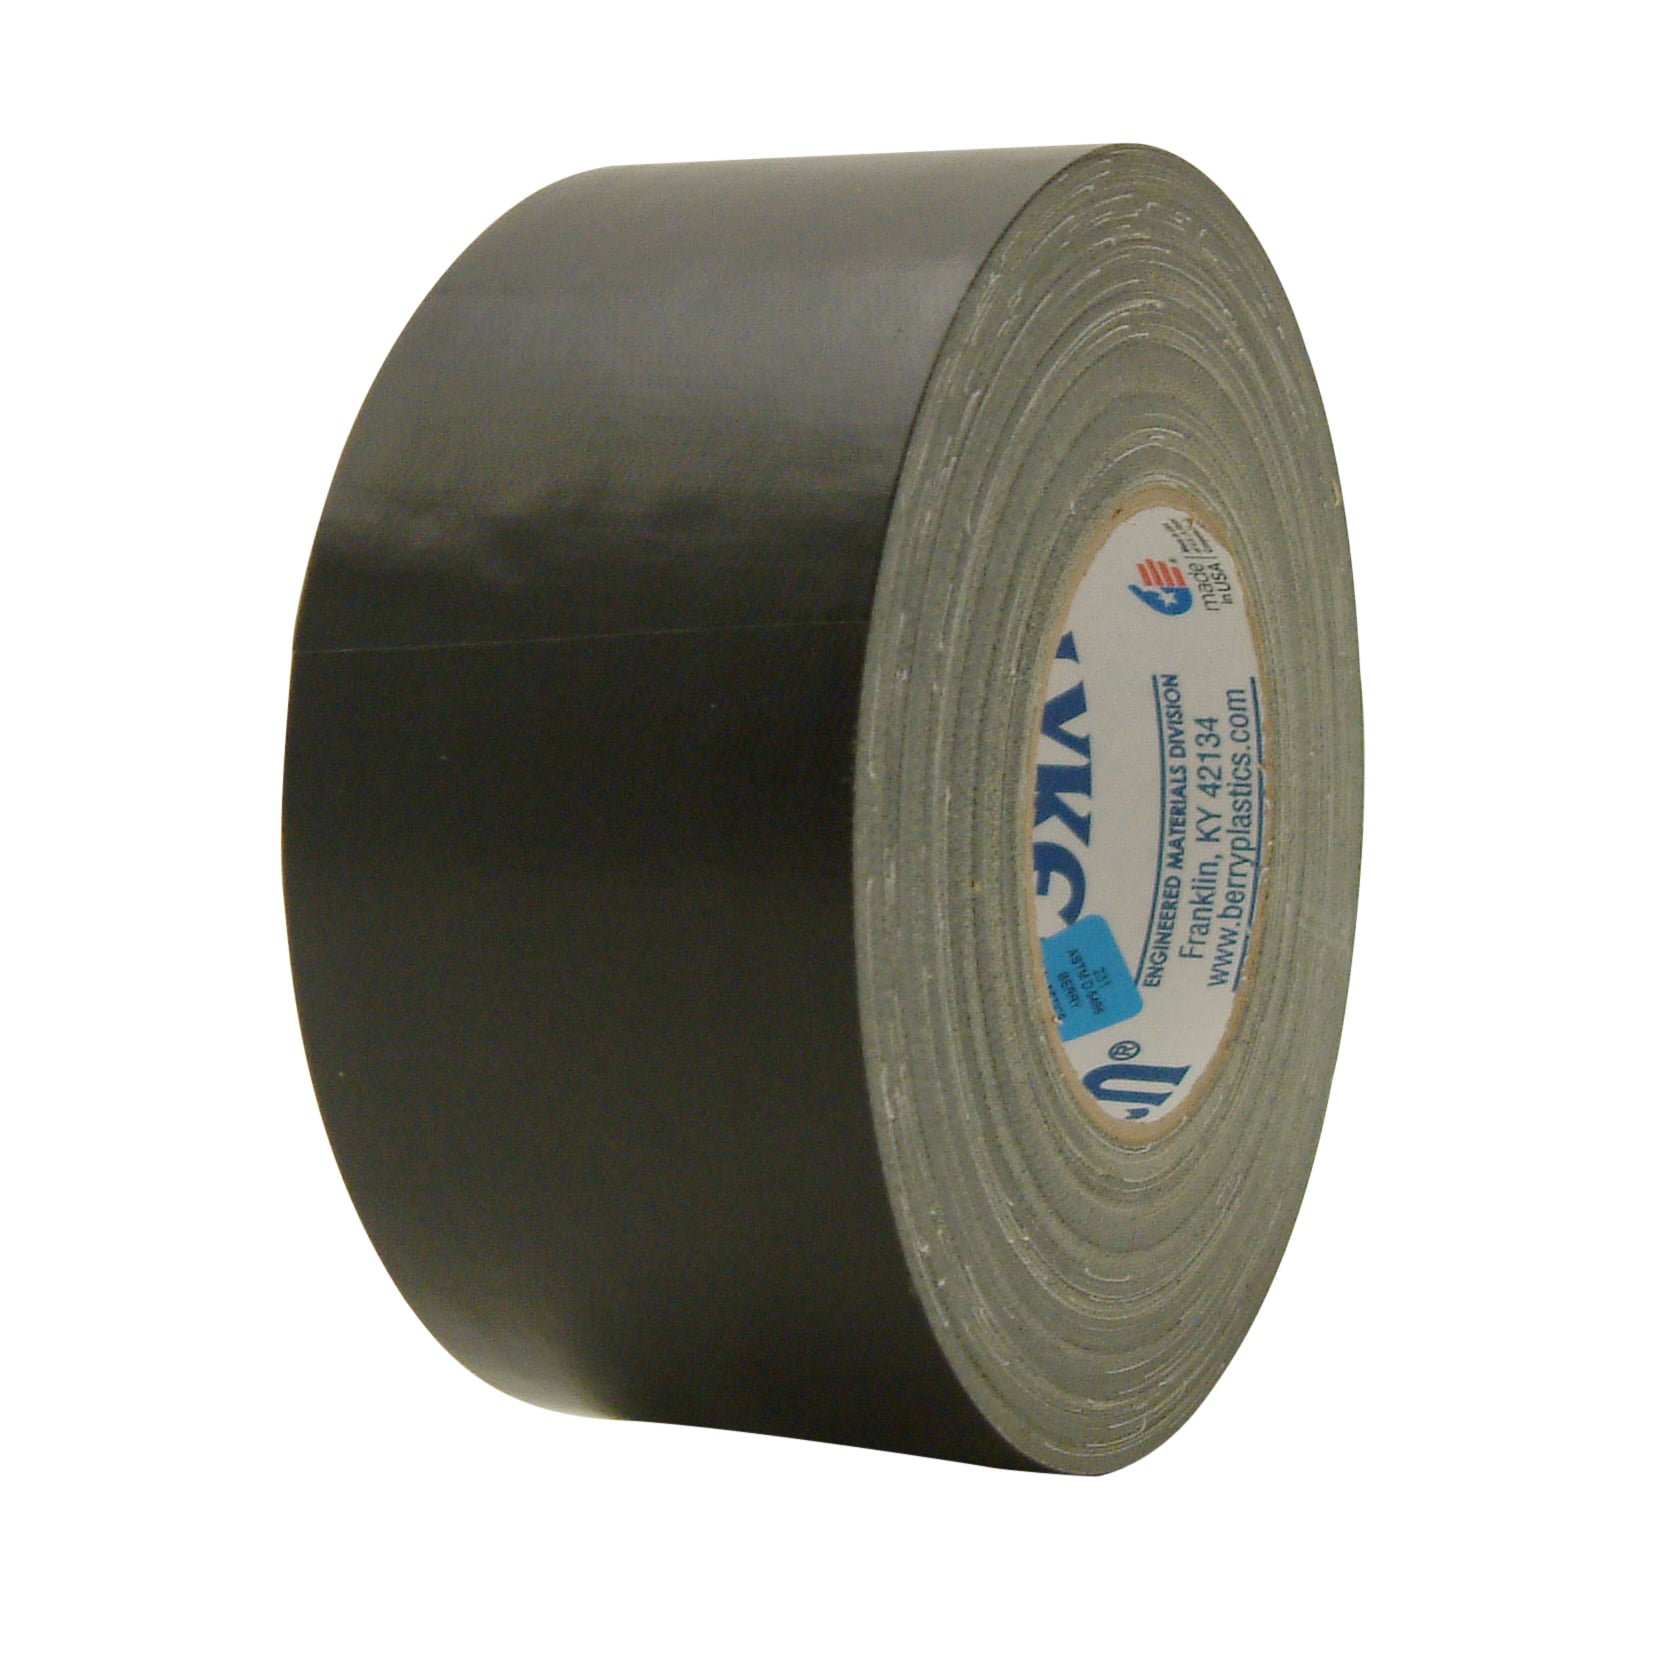 Polyken Olive Military Grade Duct Tape 1" x 60 yards 231 